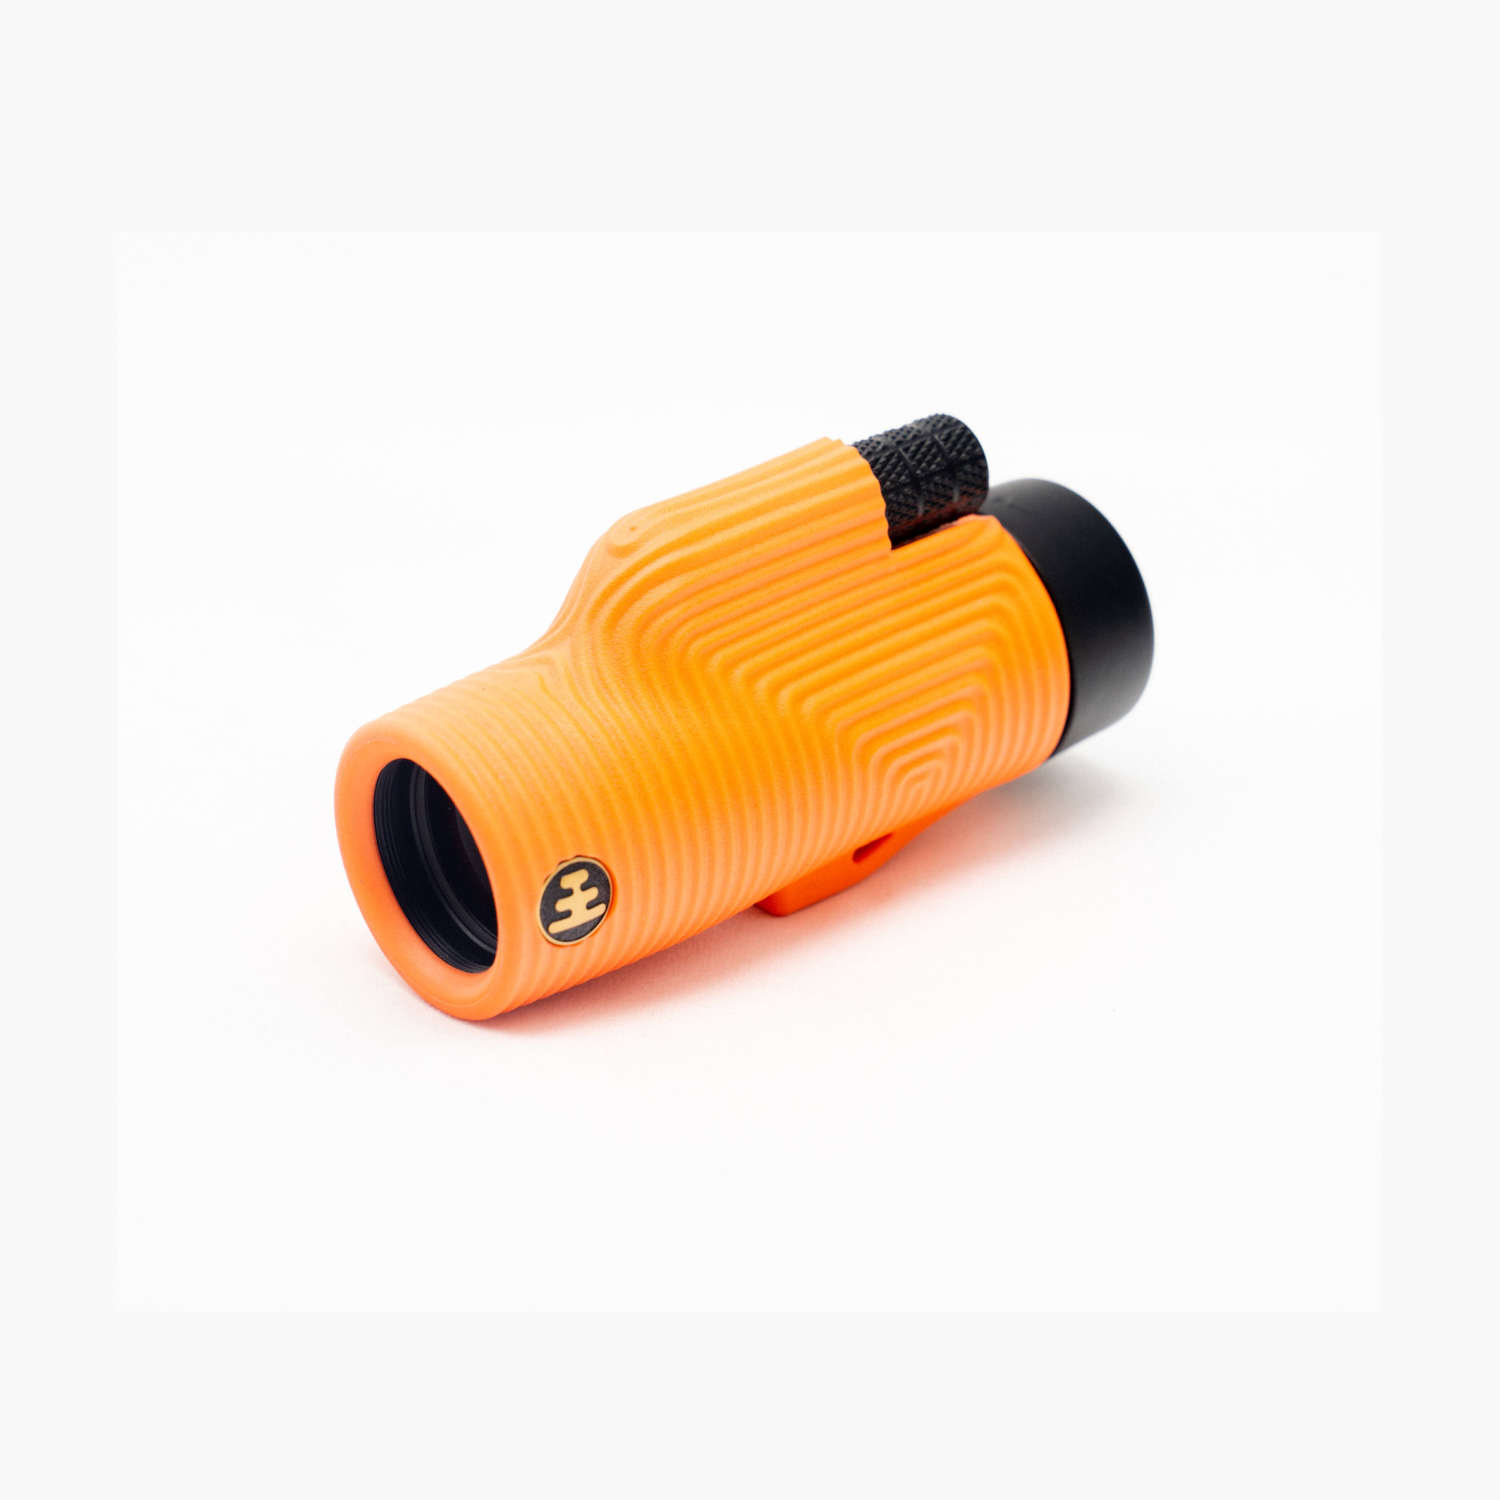 Featured product image for Zoom Tube 8x32 Monocular Telescope